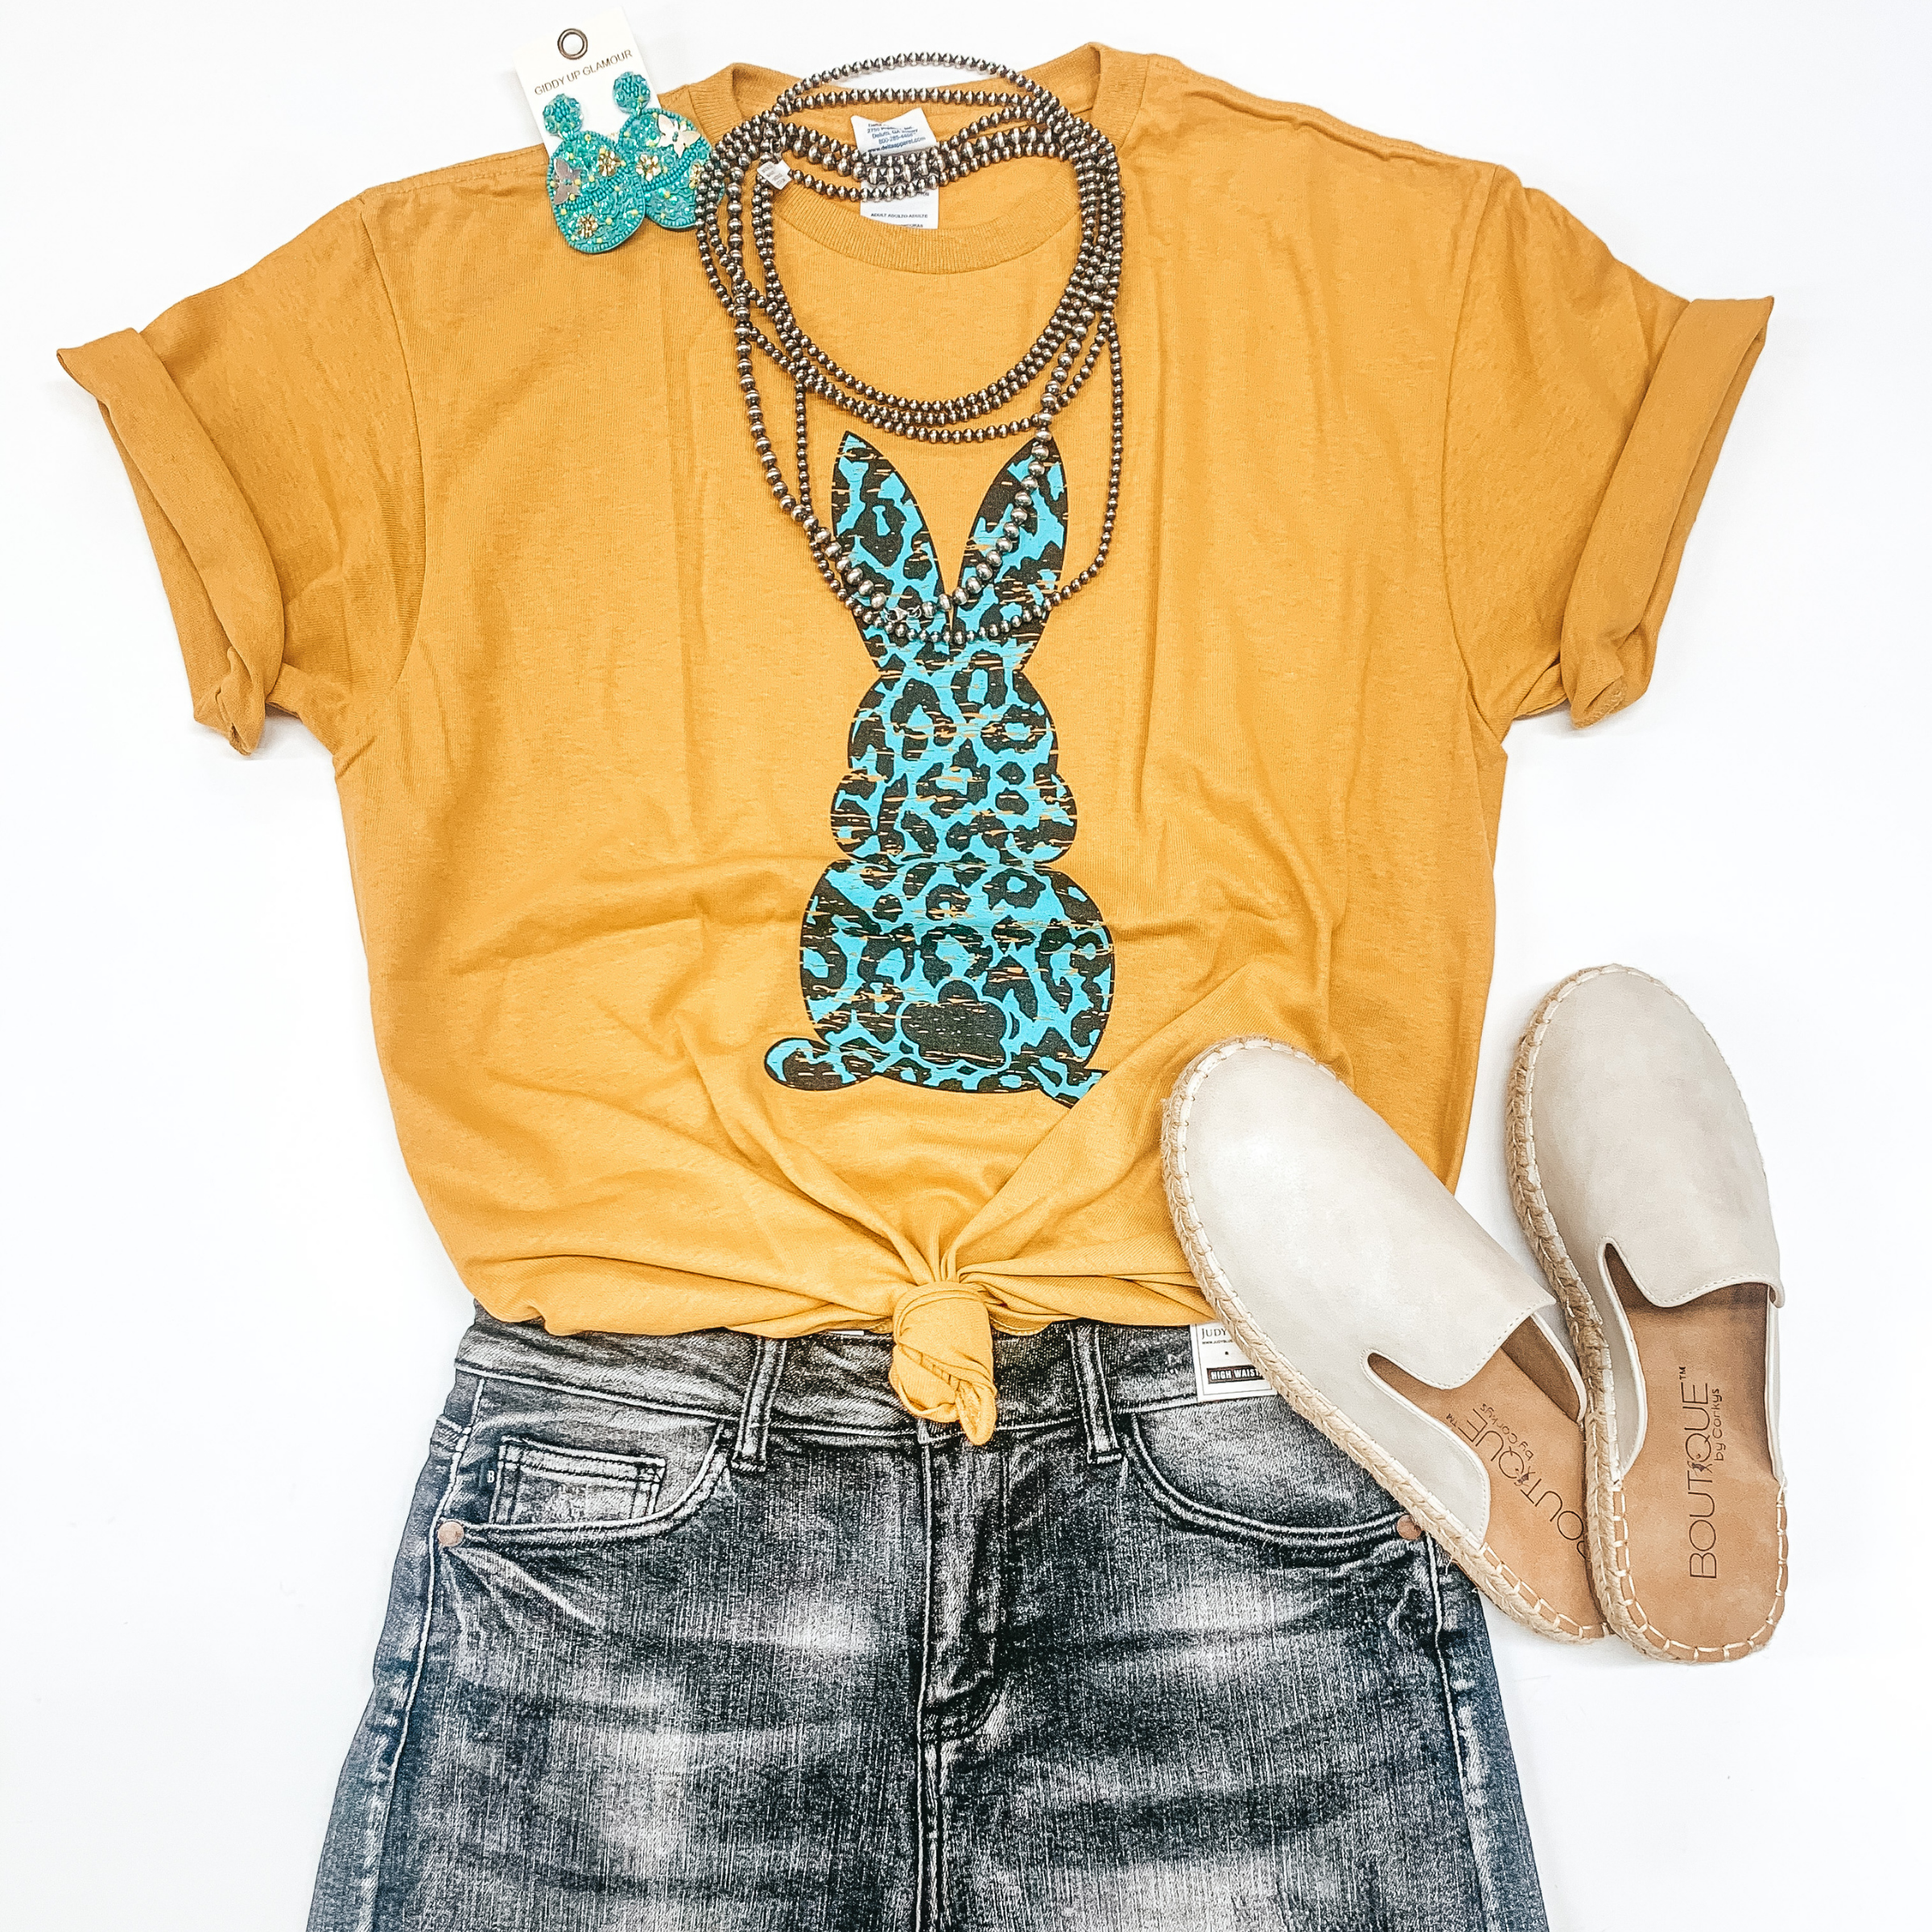 The Bunny Hop Mint Leopard Bunny Short Sleeve Graphic Tee in Mustard - Giddy Up Glamour Boutique